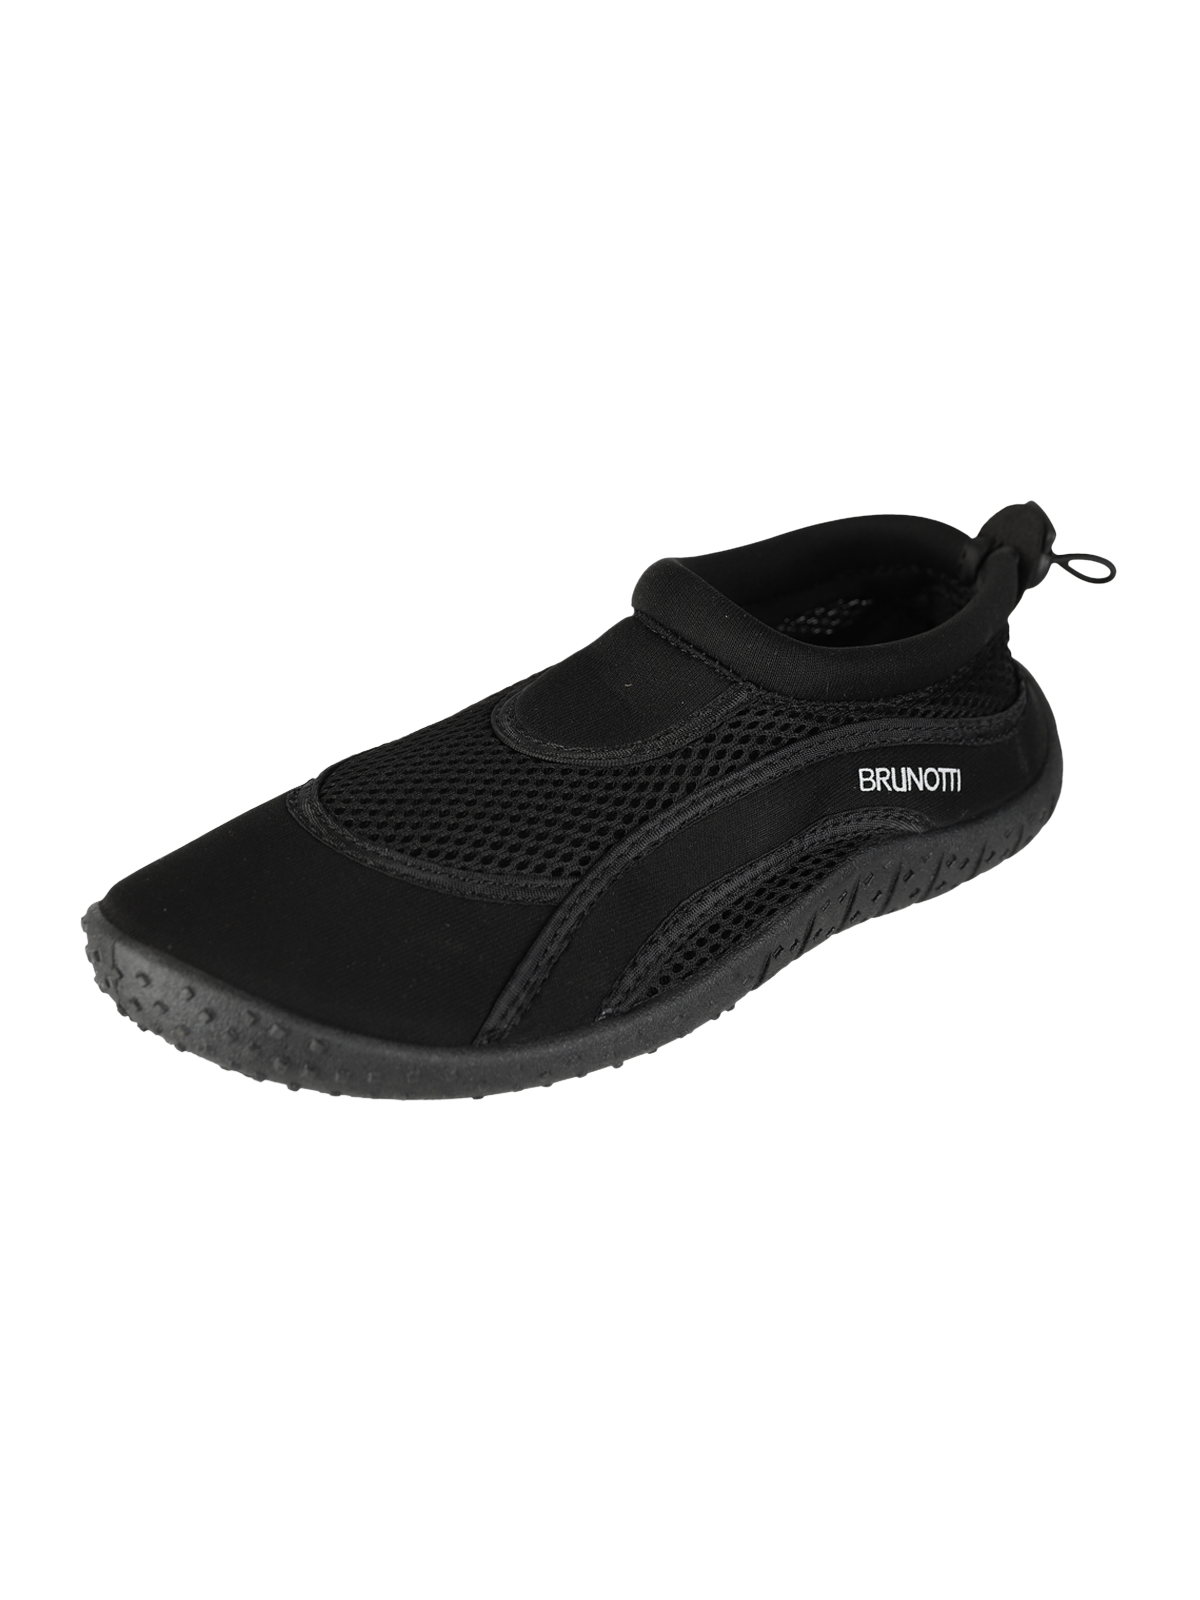 Paddle Water Shoes | Black